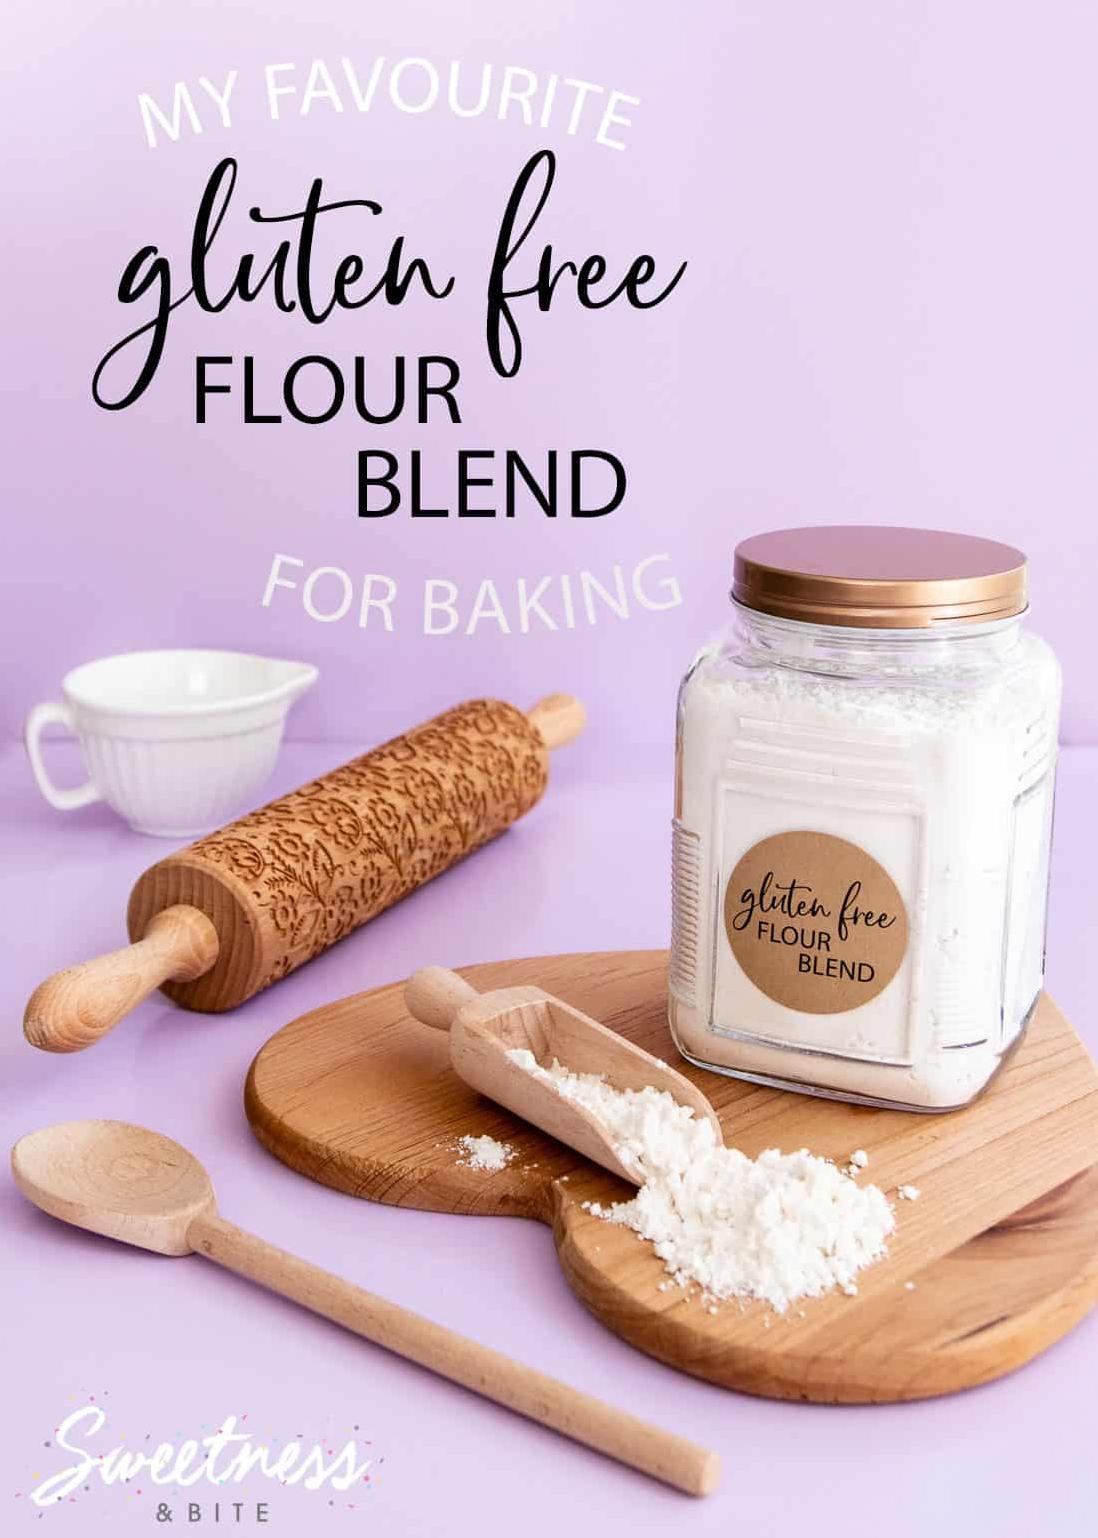  The perfect solution for gluten-free baking!